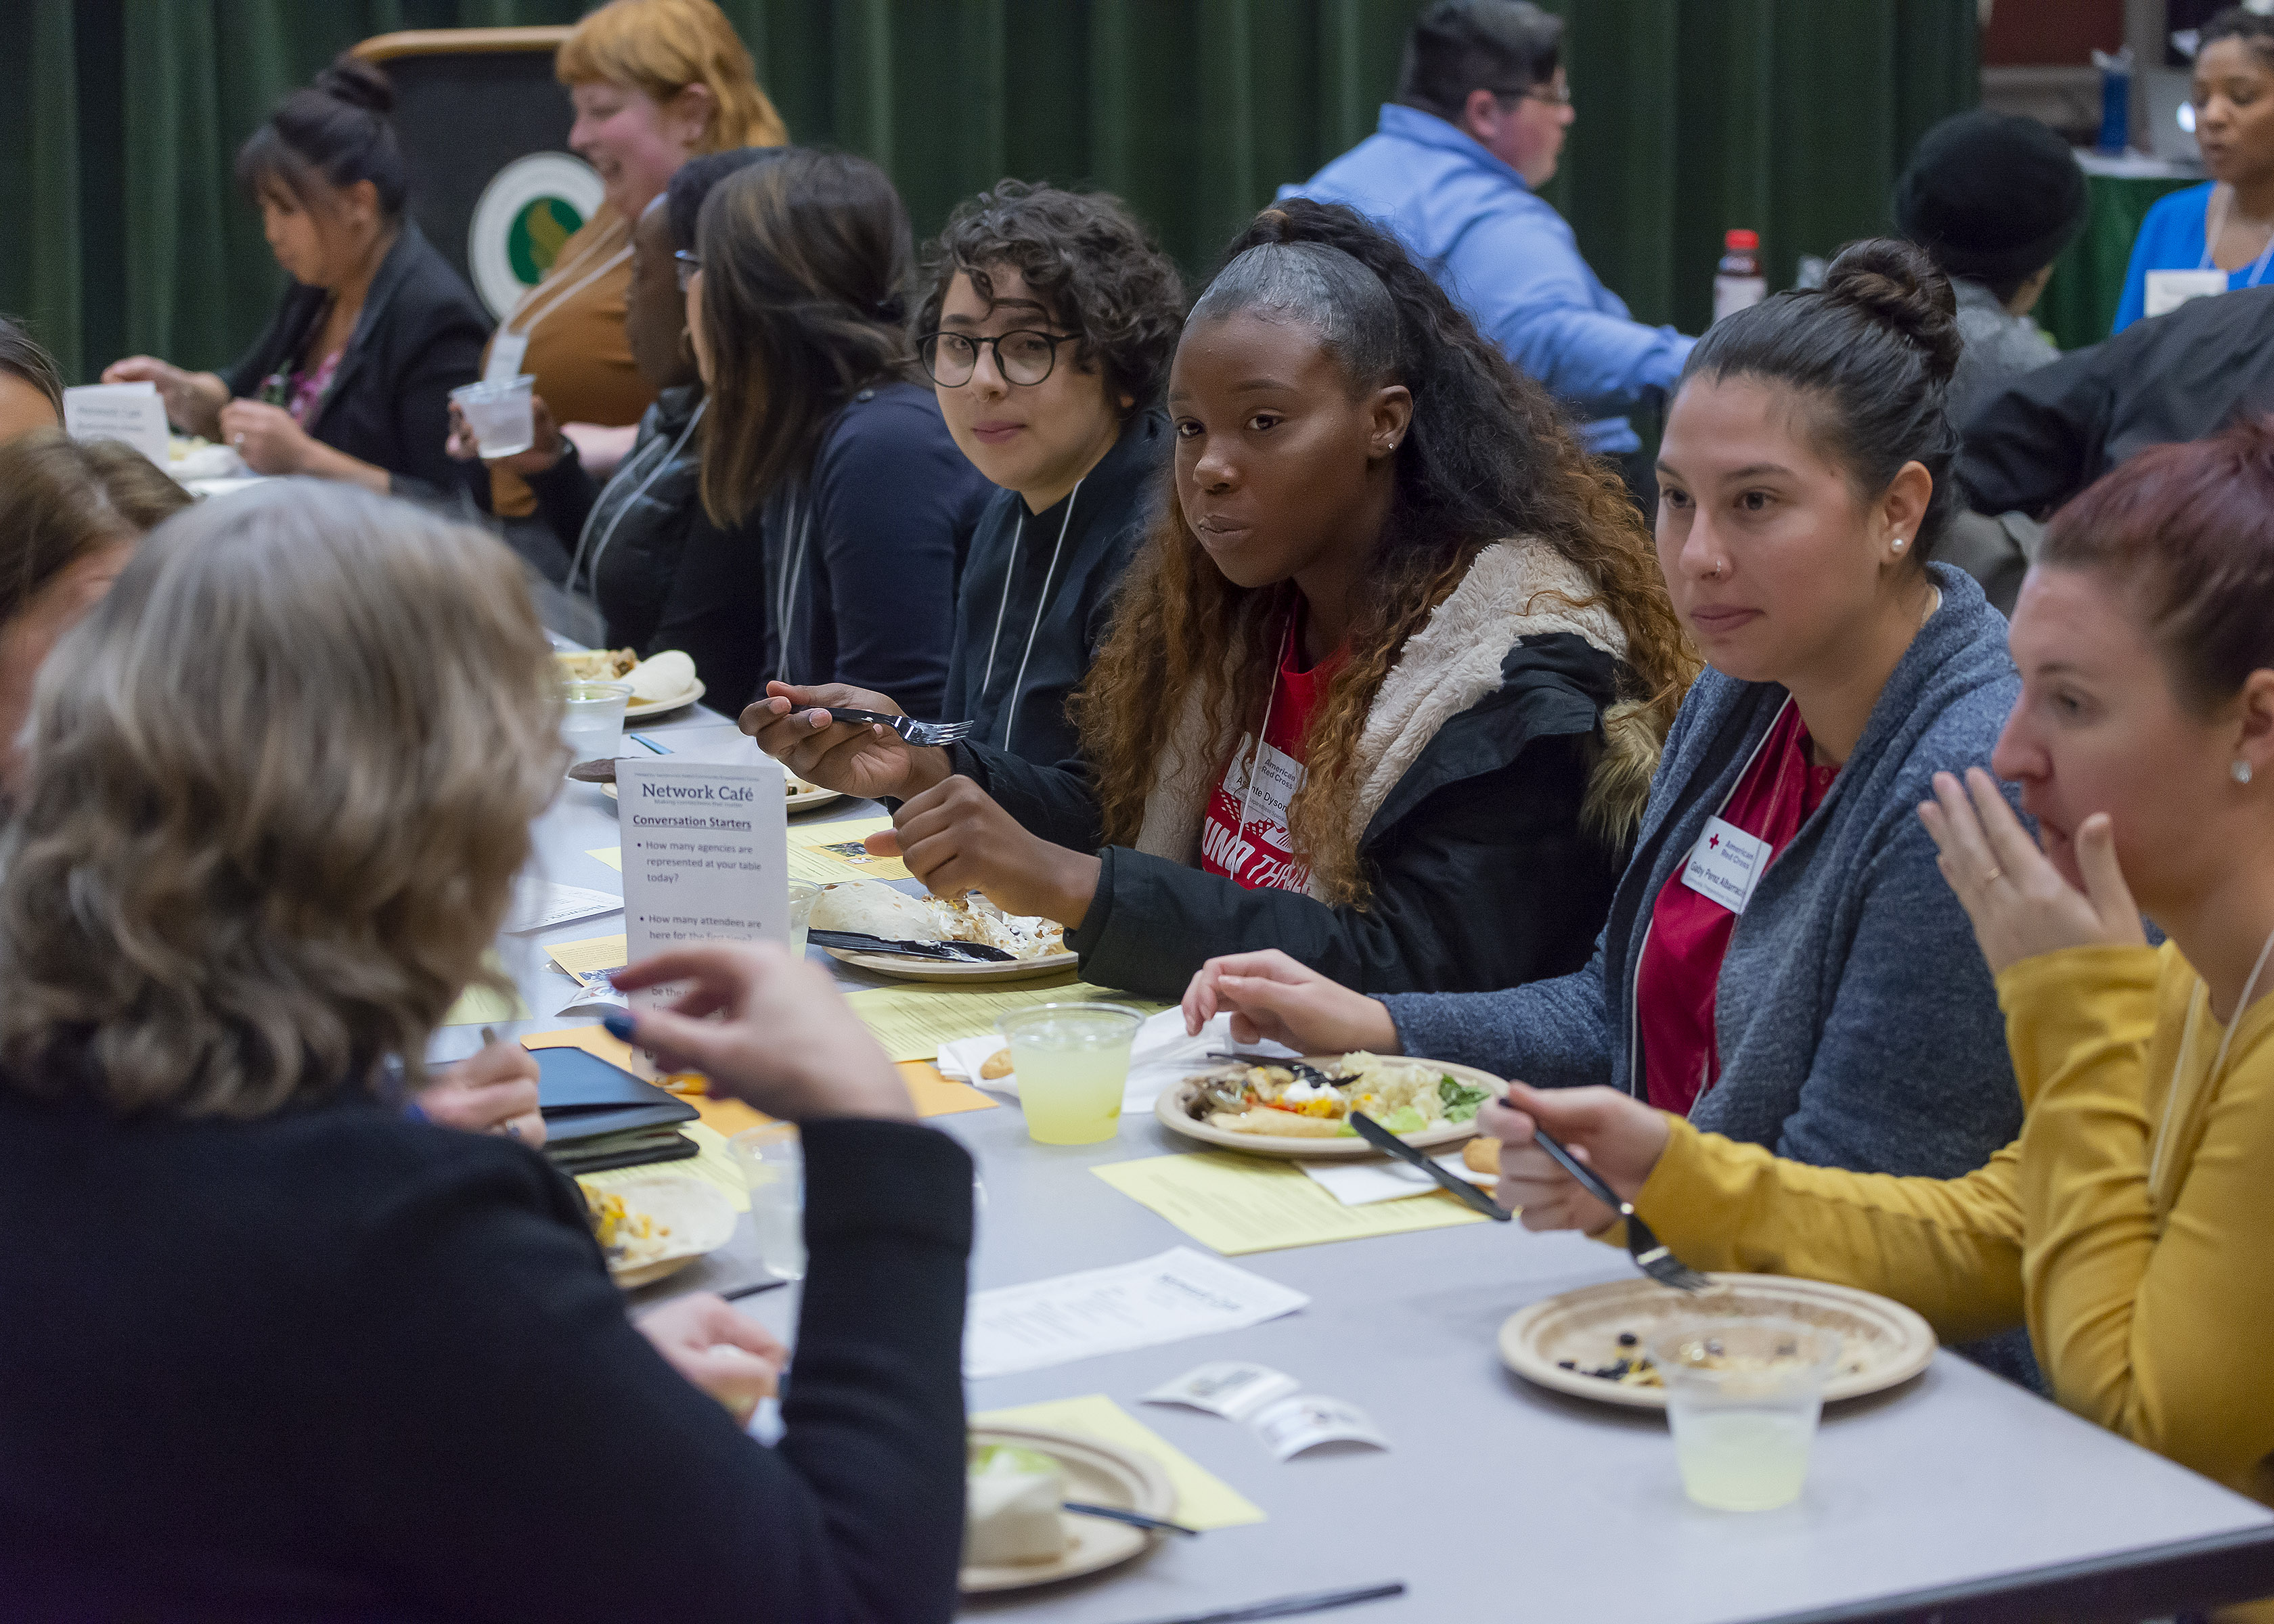 Guests from community organizations in discussion at Network Cafe in January 2020